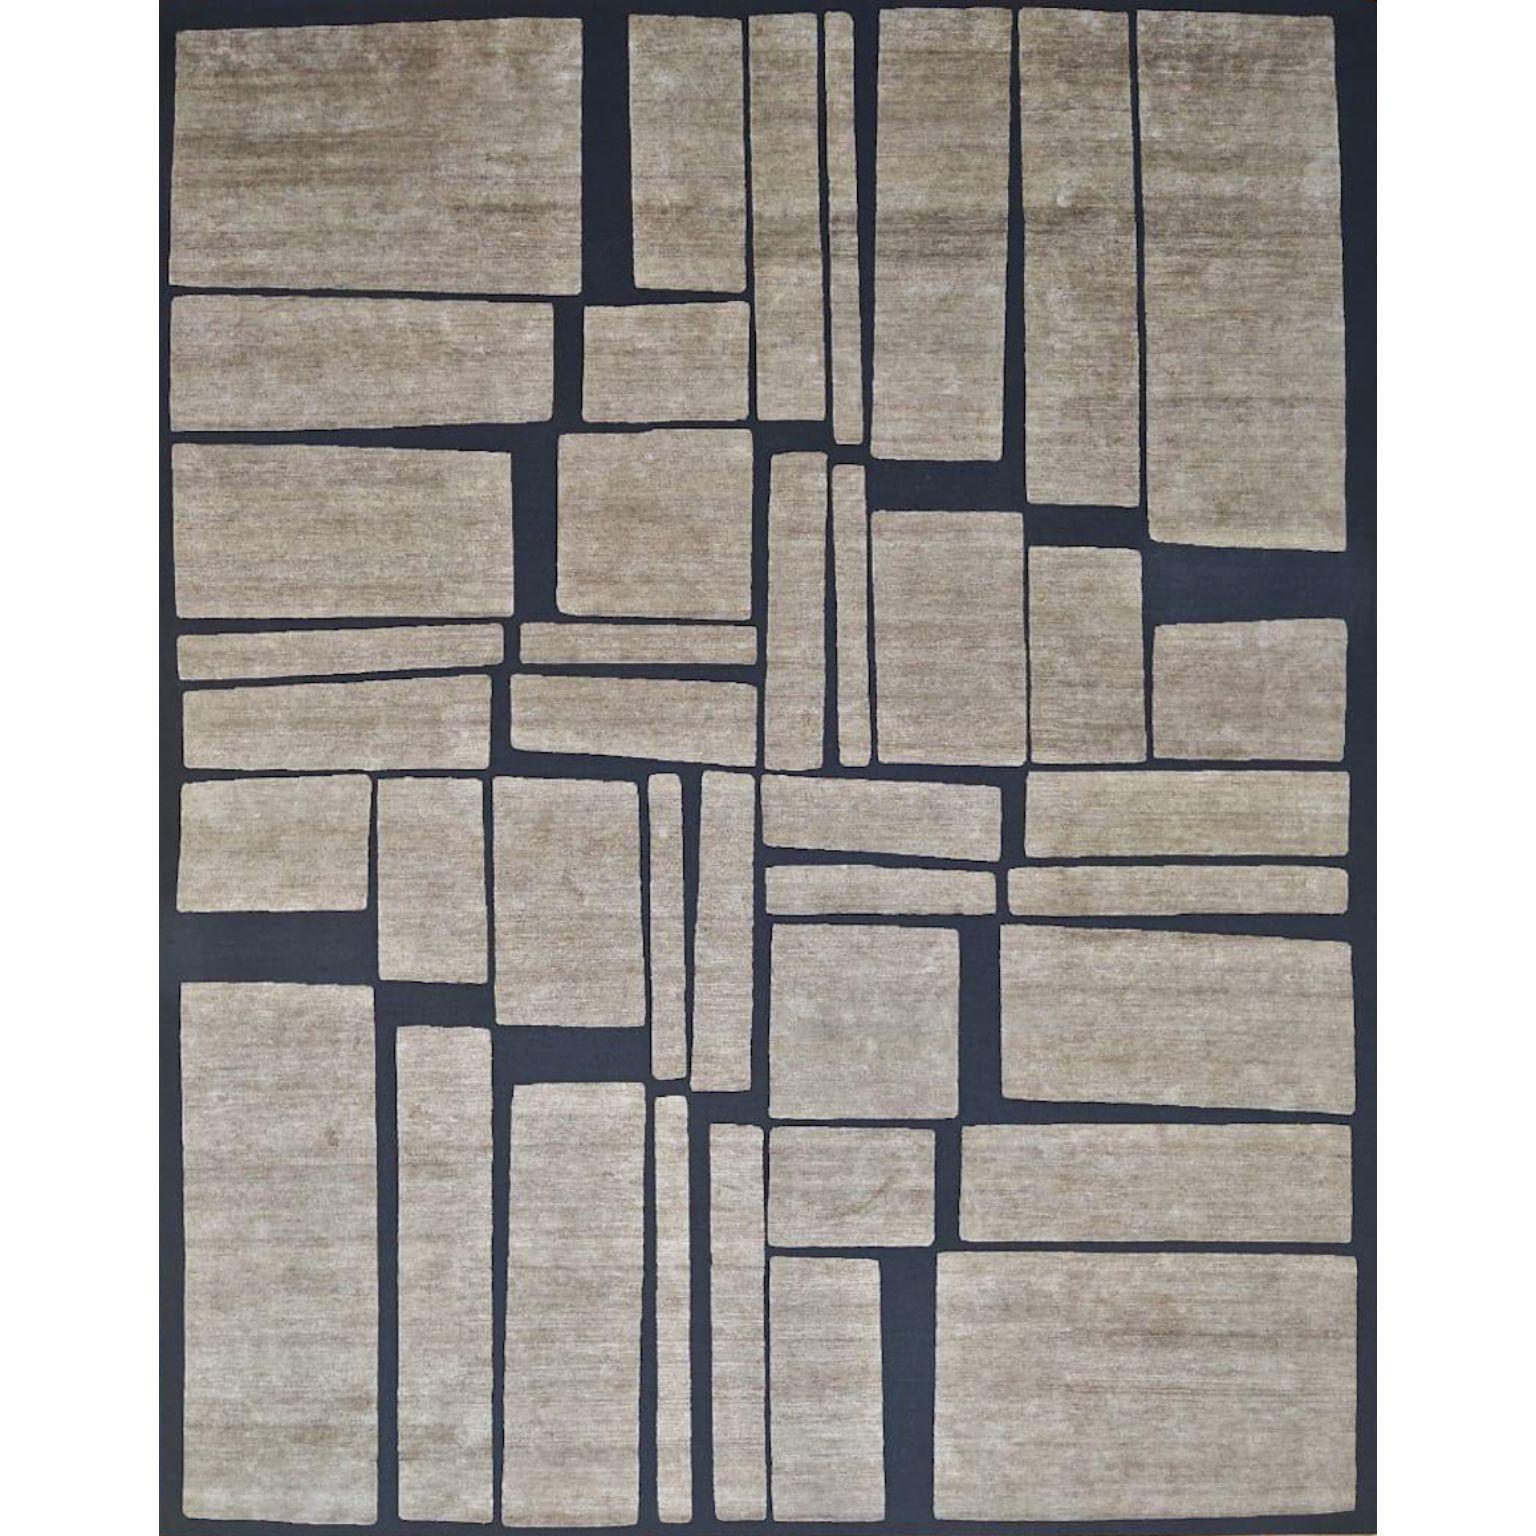 Windowpane small rug by Art & Loom
Dimensions: D 243.4 x H 304.8 cm
Materials: Allo & New Zealand wool
Quality (Knots per Inch): 100
Also available in different dimensions.

Samantha Gallacher has always had a keen eye for aesthetics, drawing